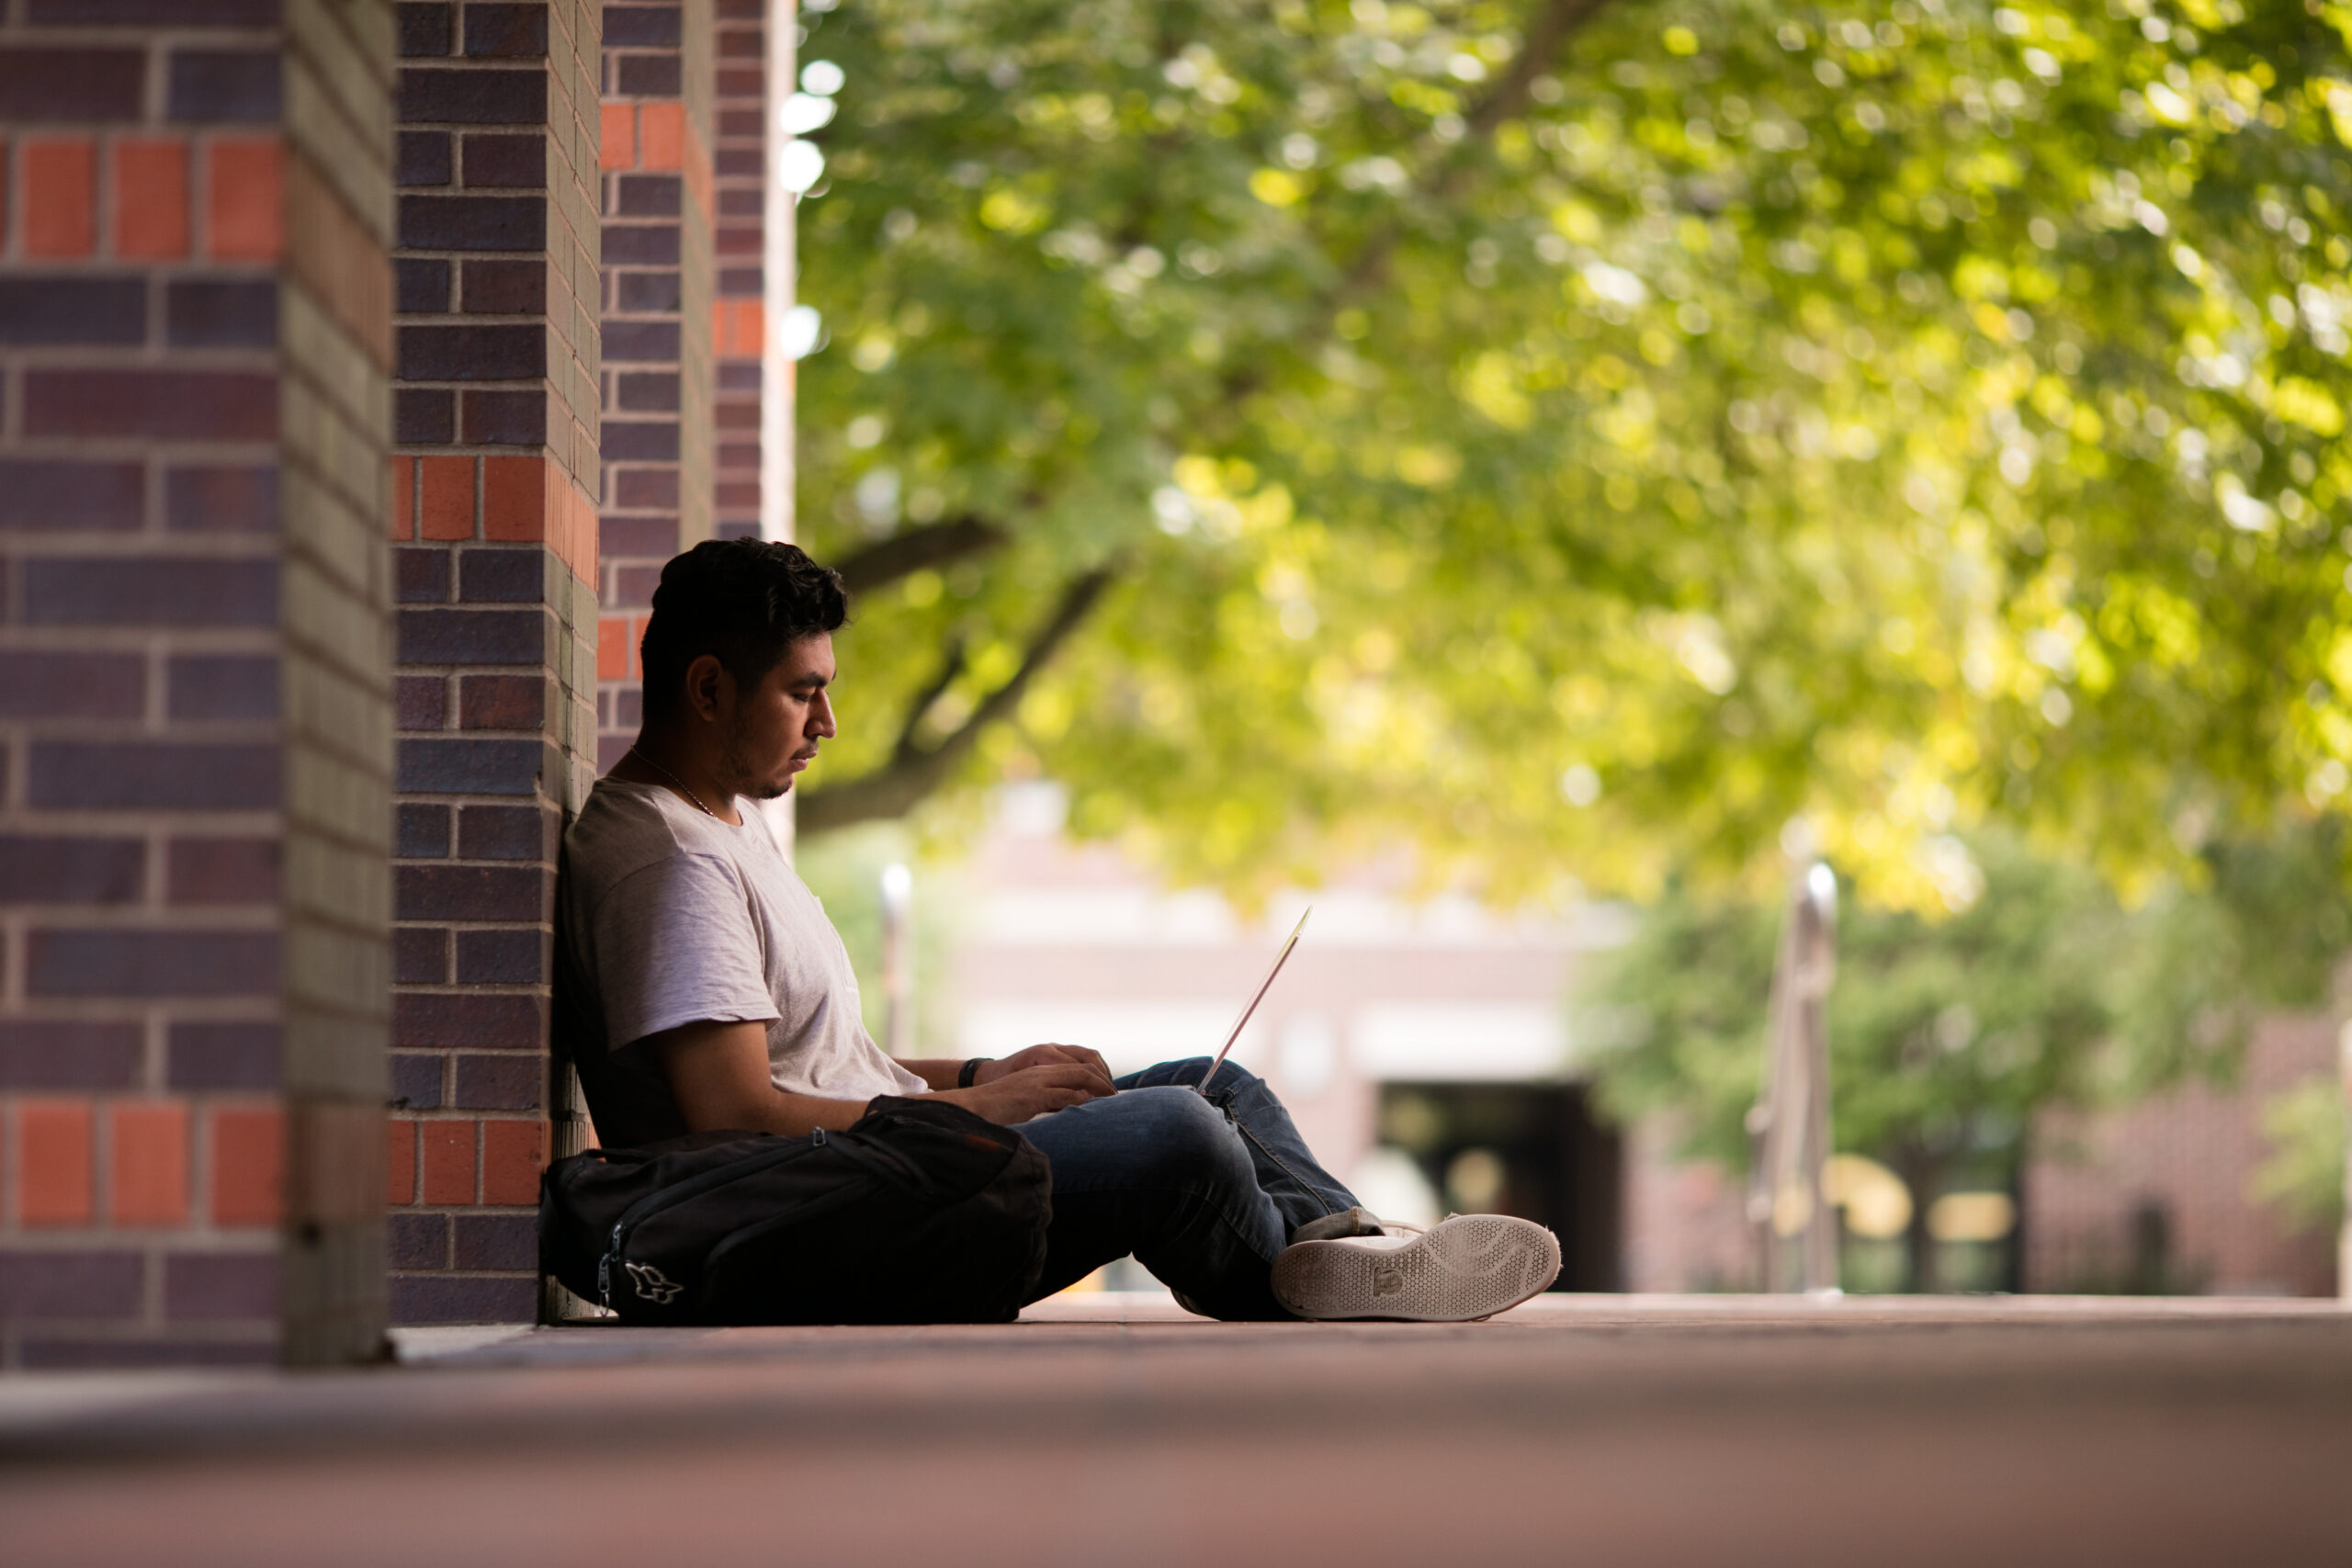 student studying outdoors